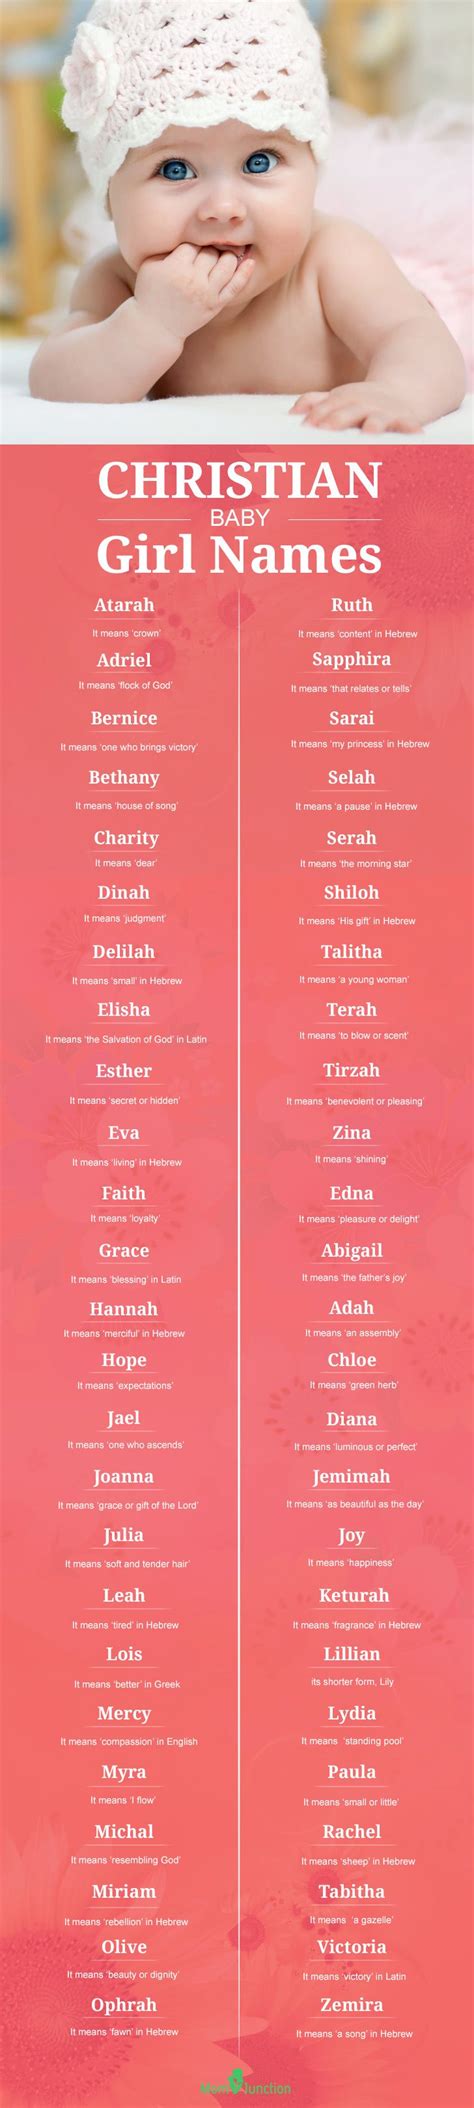 Unique Baby Names And Meanings